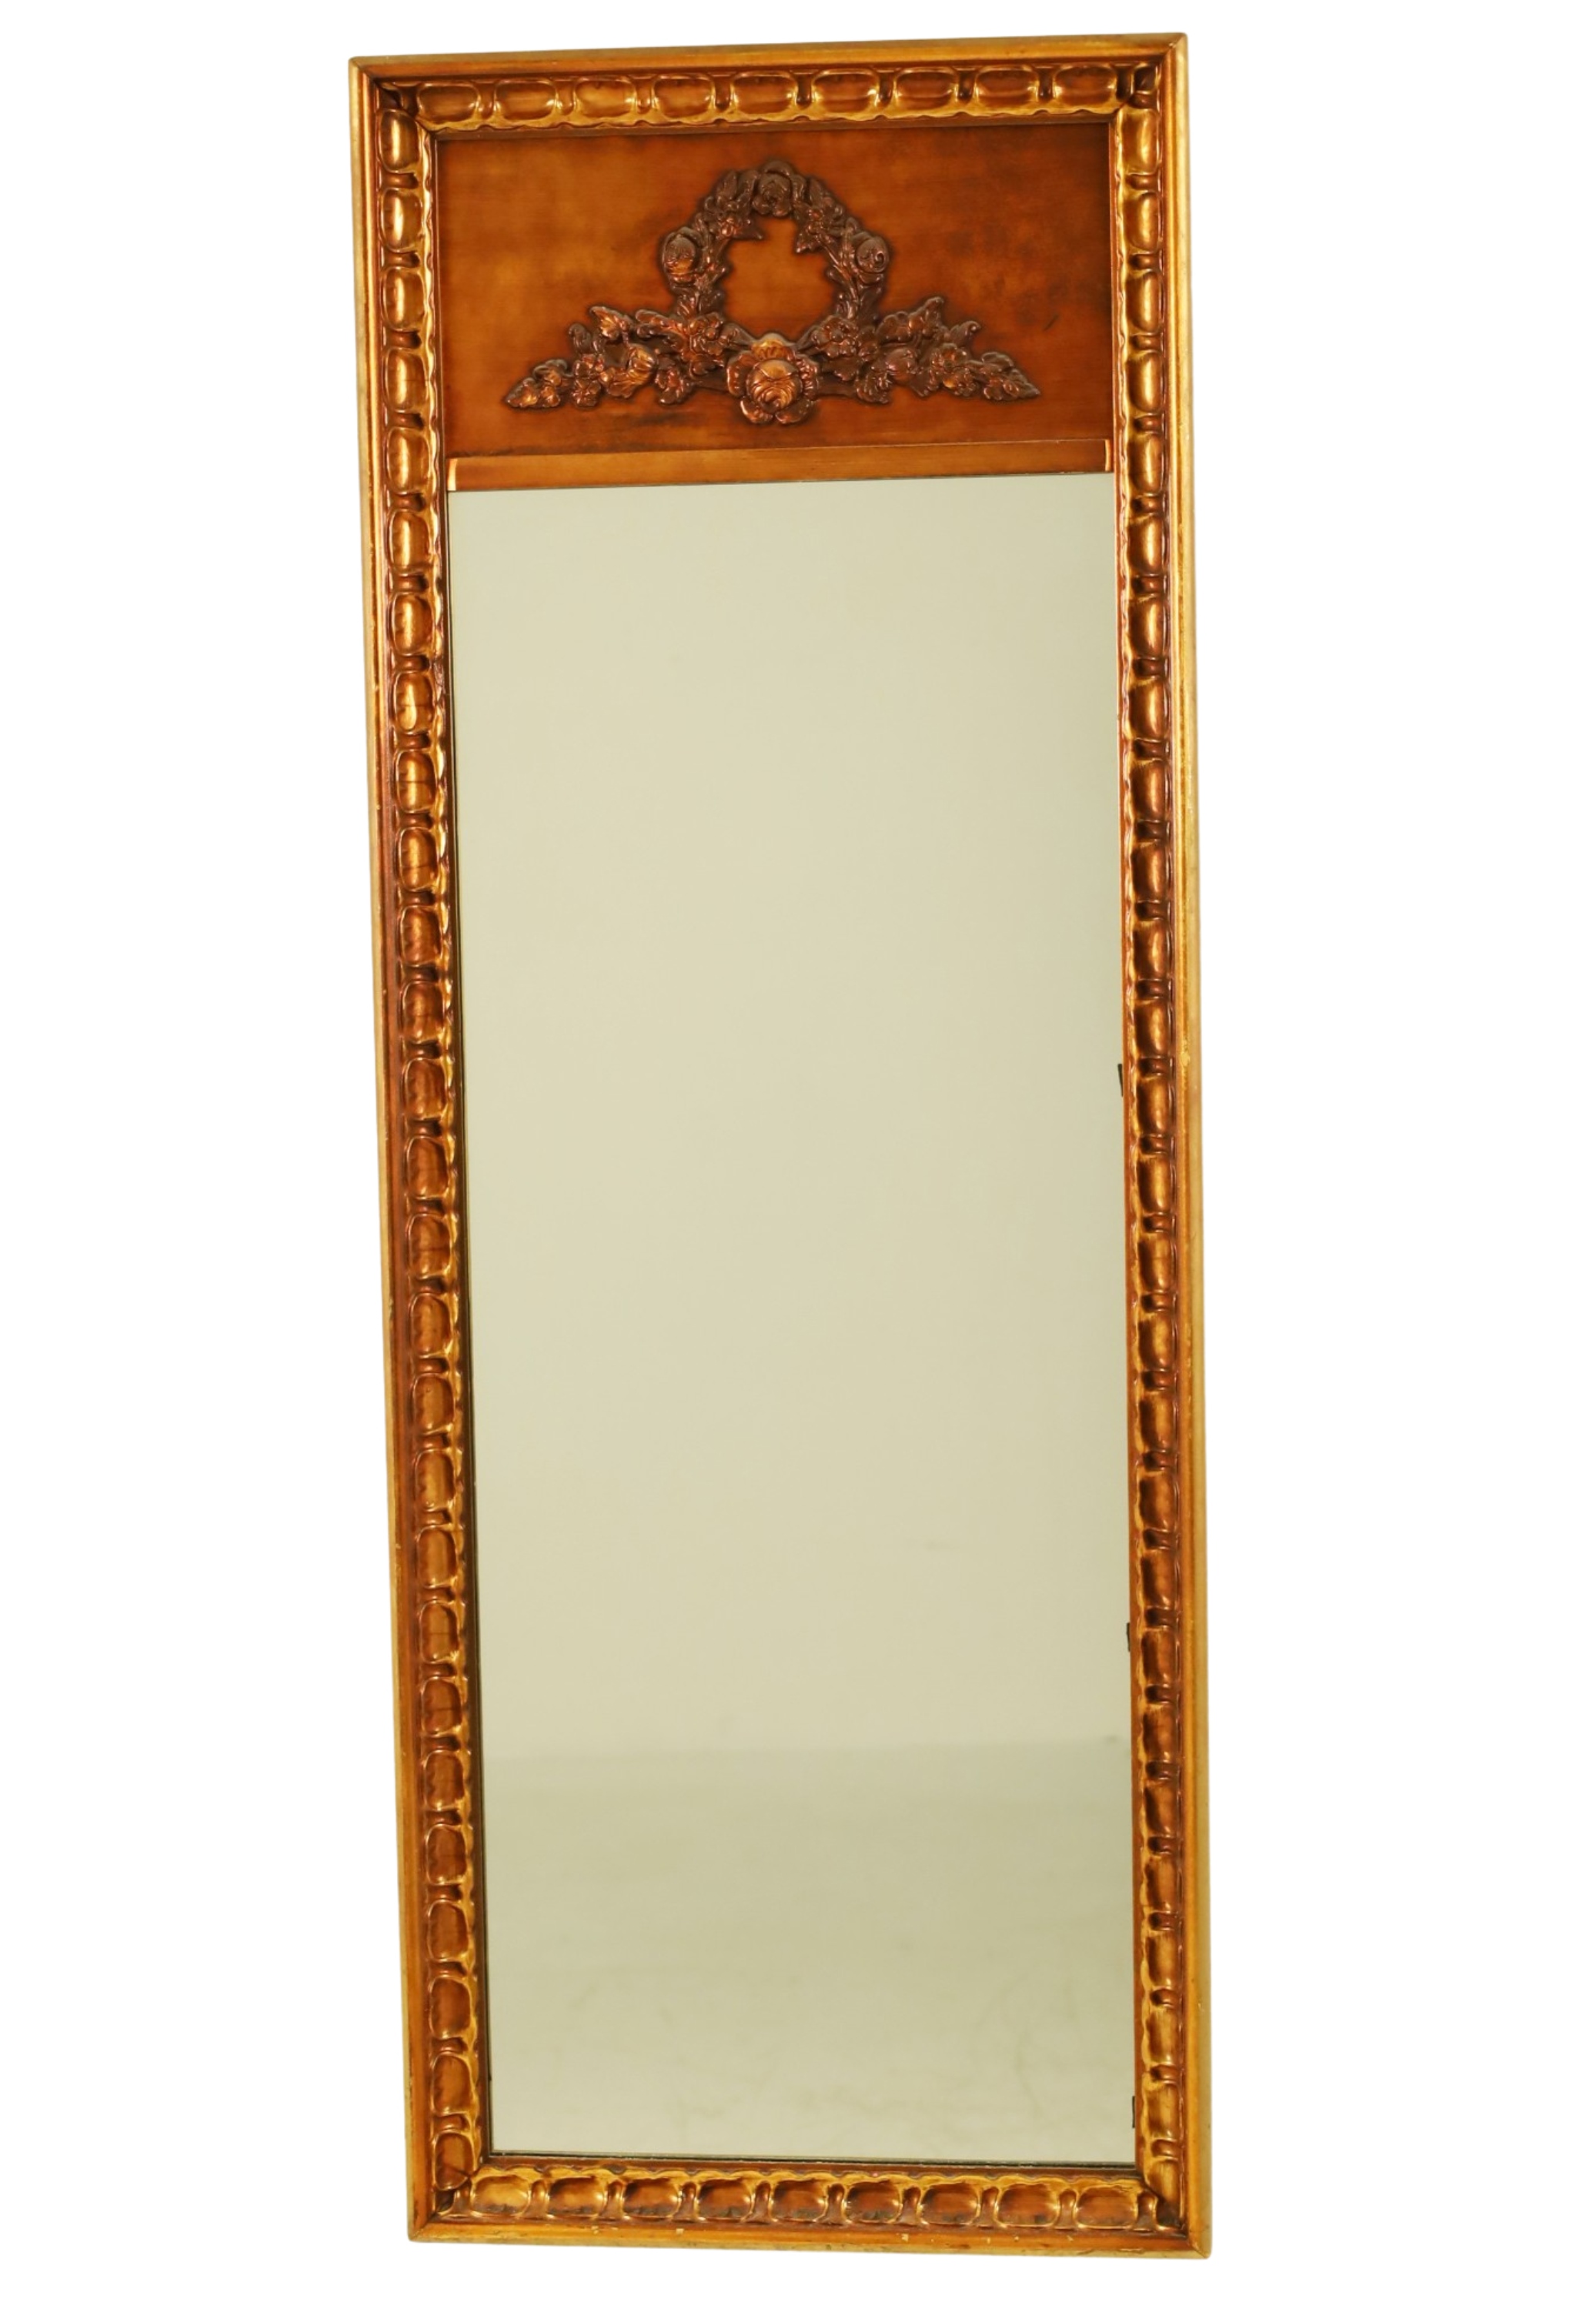 DECORATIVE FRENCH STYLE MIRROR 2a5b25